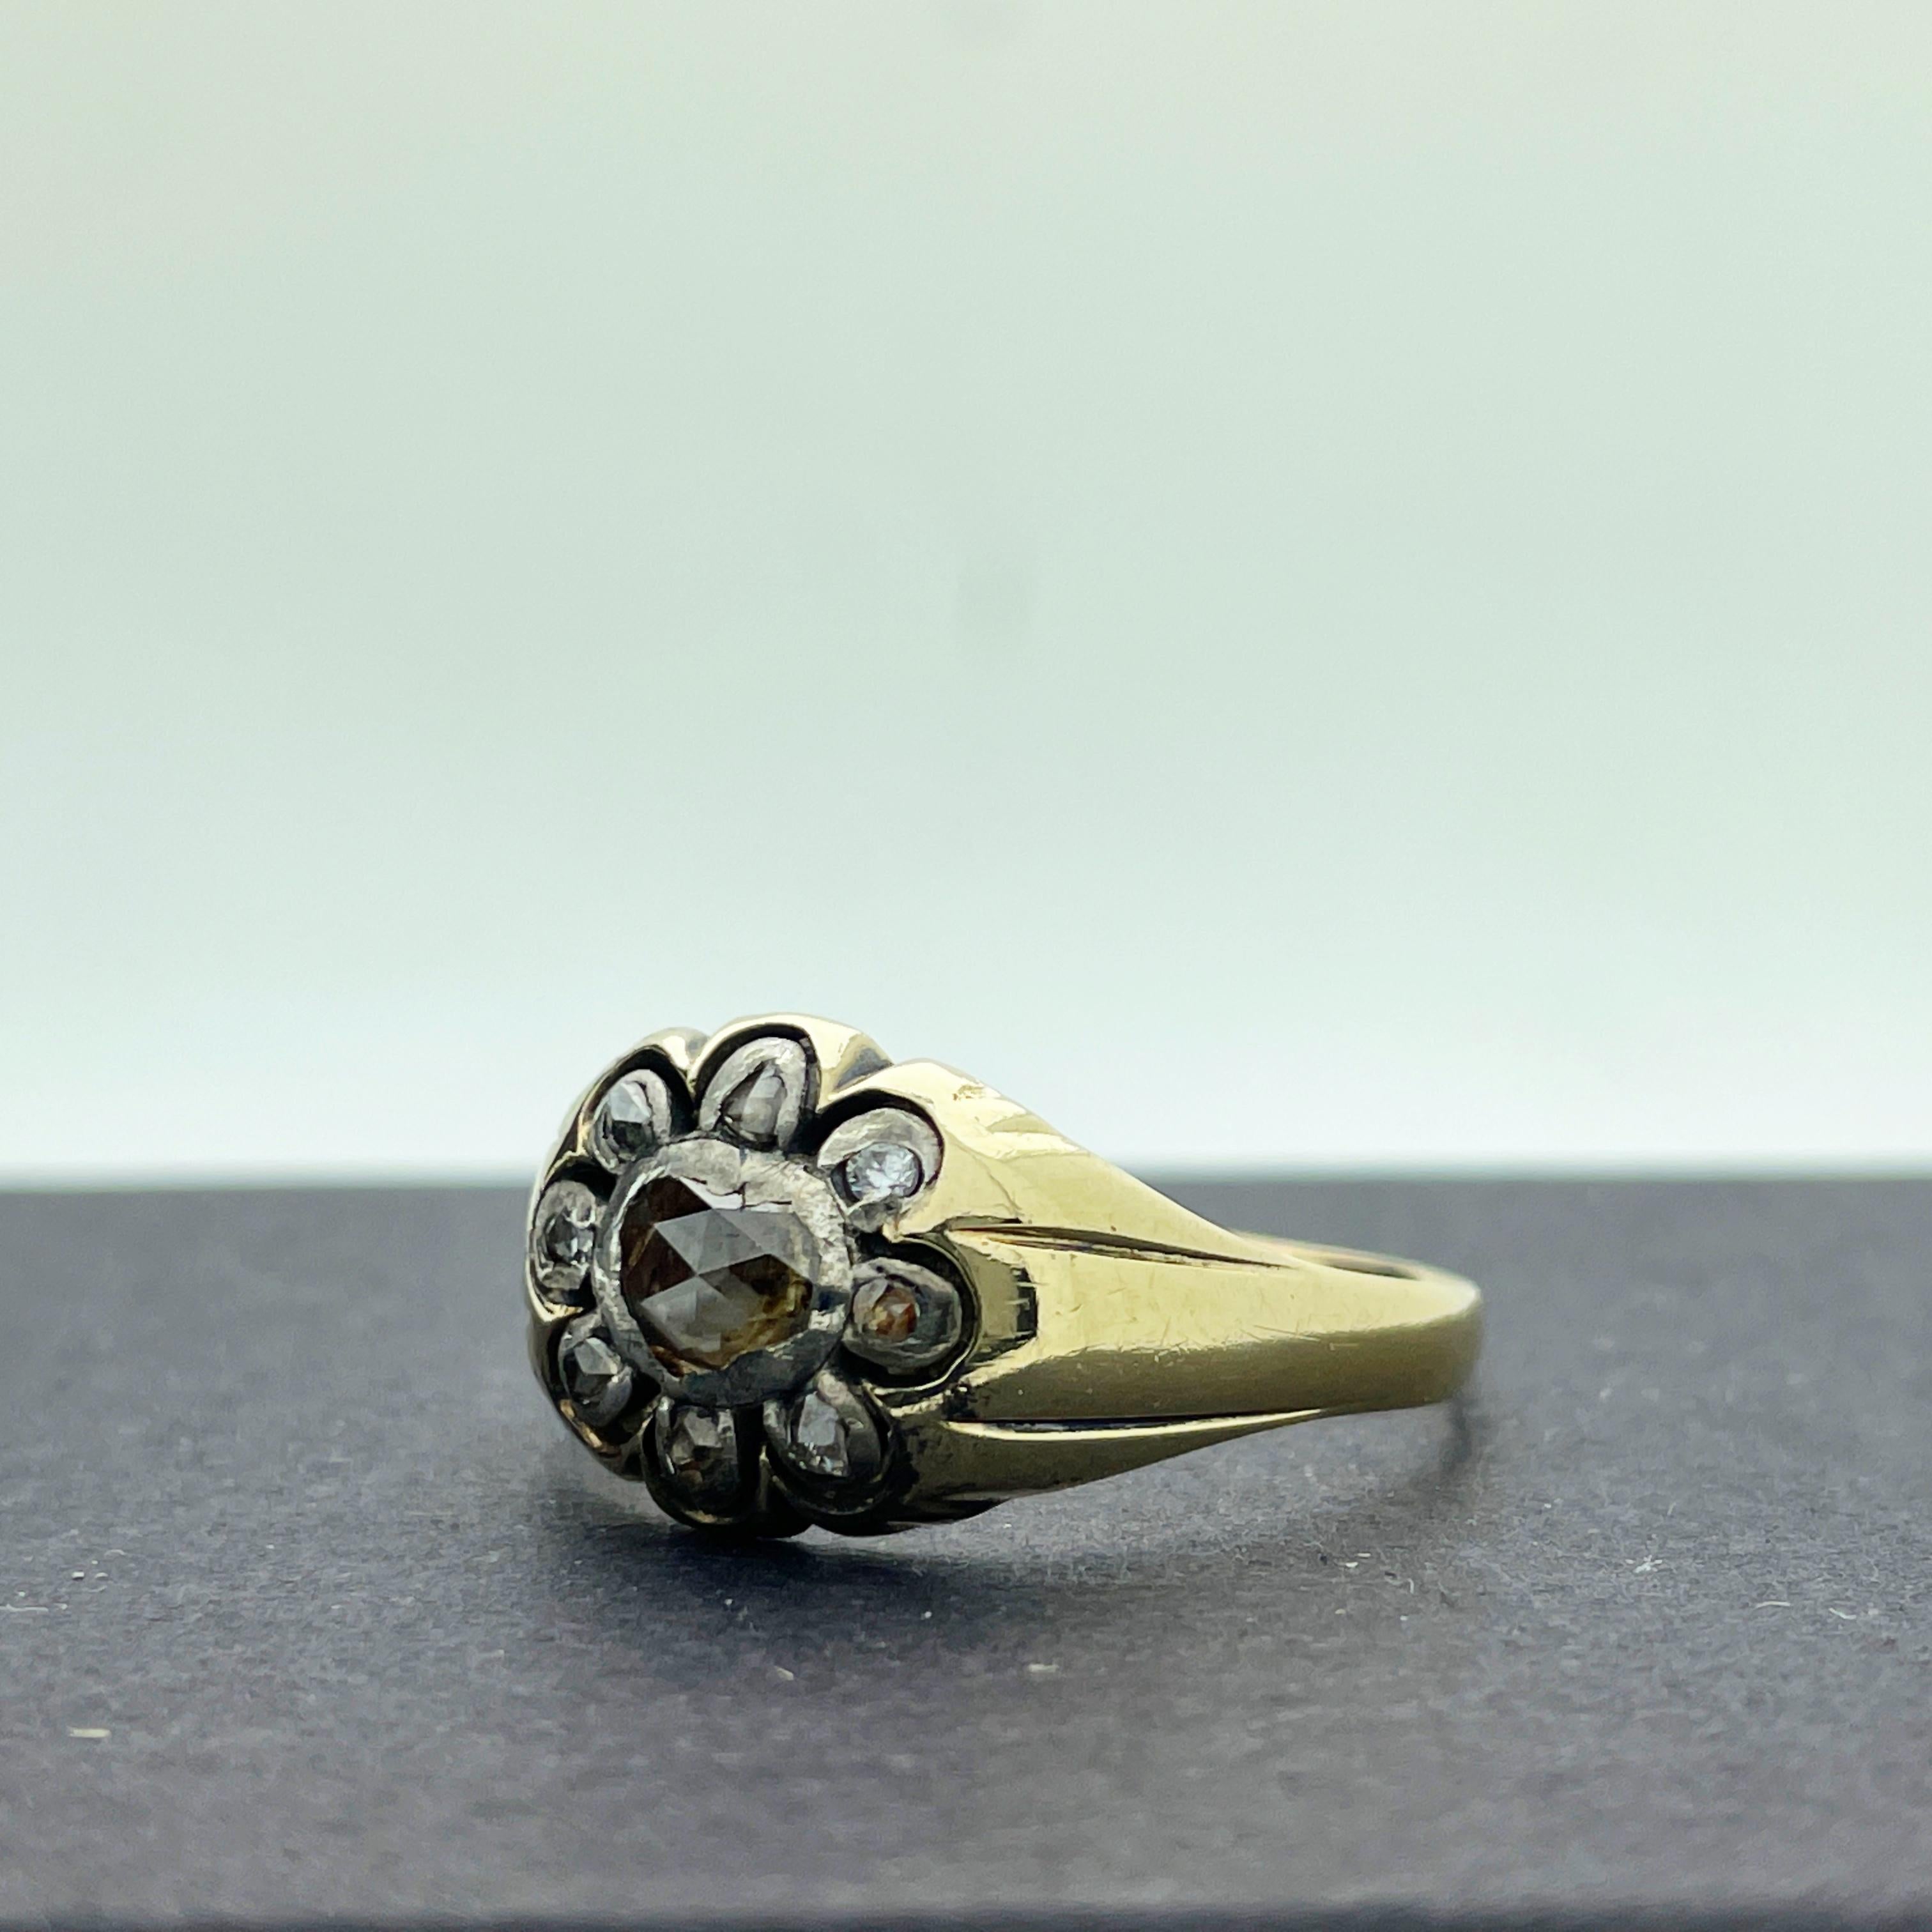 Here is a lovely 18k Yellow Gold Antique 18th century Georgian Rose Cut Diamond Ring.

This Georgian era diamond ring features a center approx. 0.25ct rose oval cut diamond measuring approx. 5.50mm - 4.50mm (in diameter). Center diamond is pique